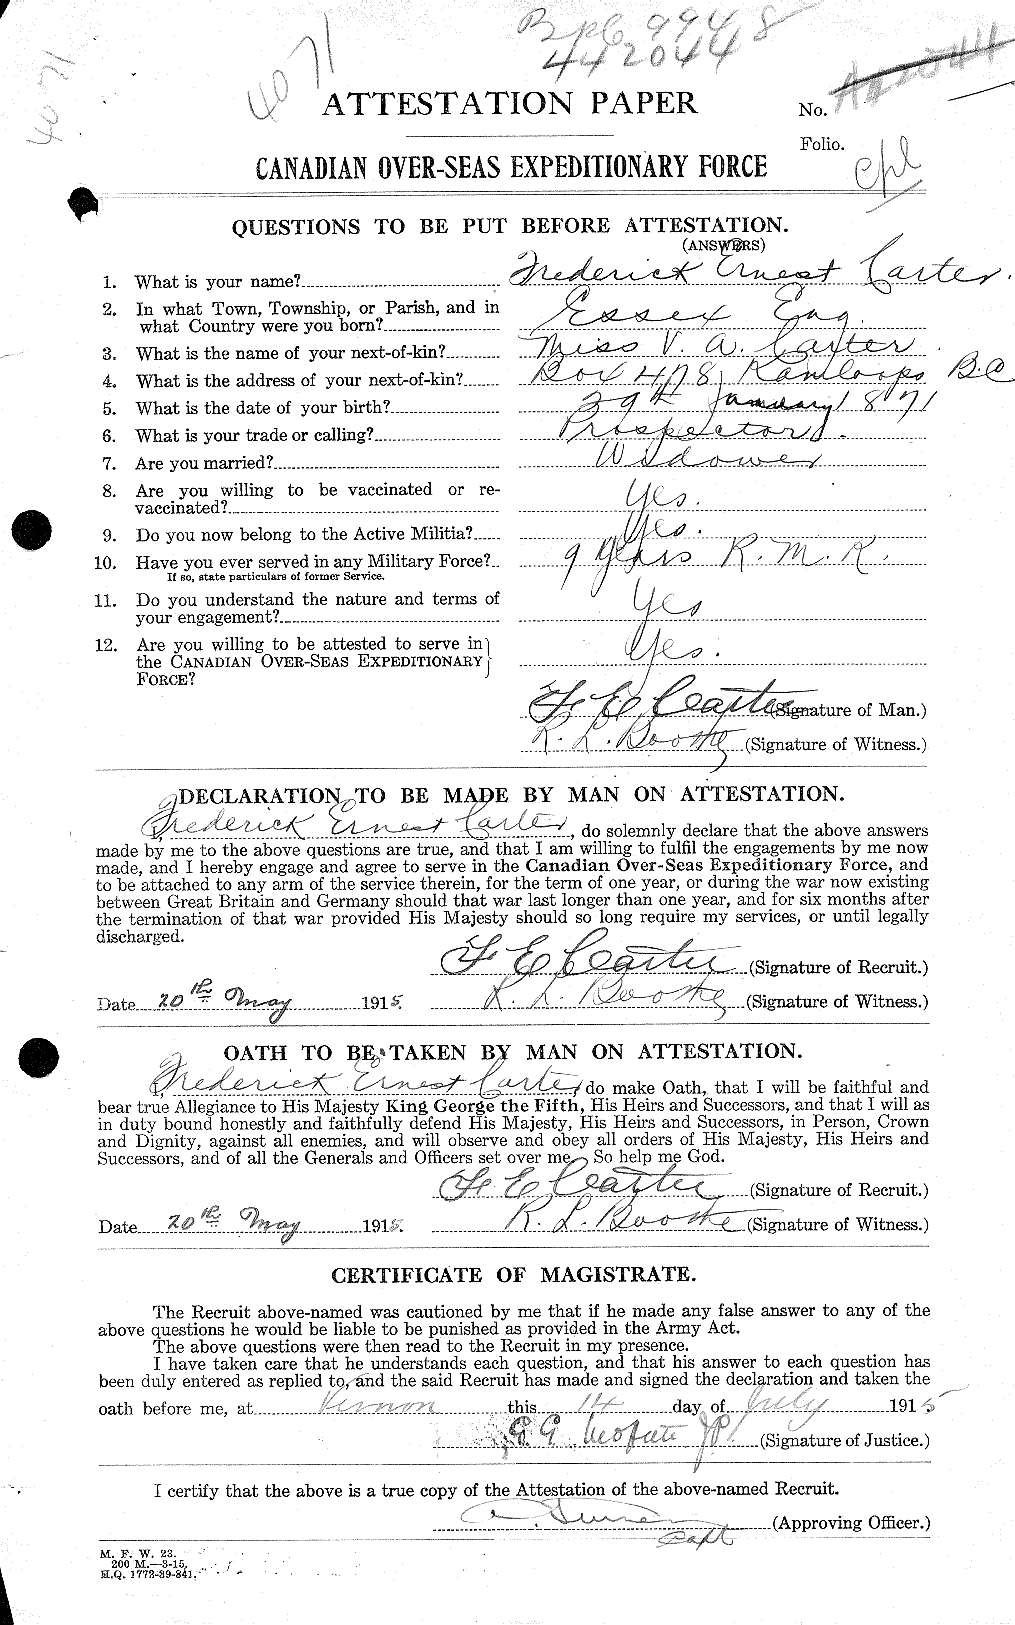 Personnel Records of the First World War - CEF 011106a